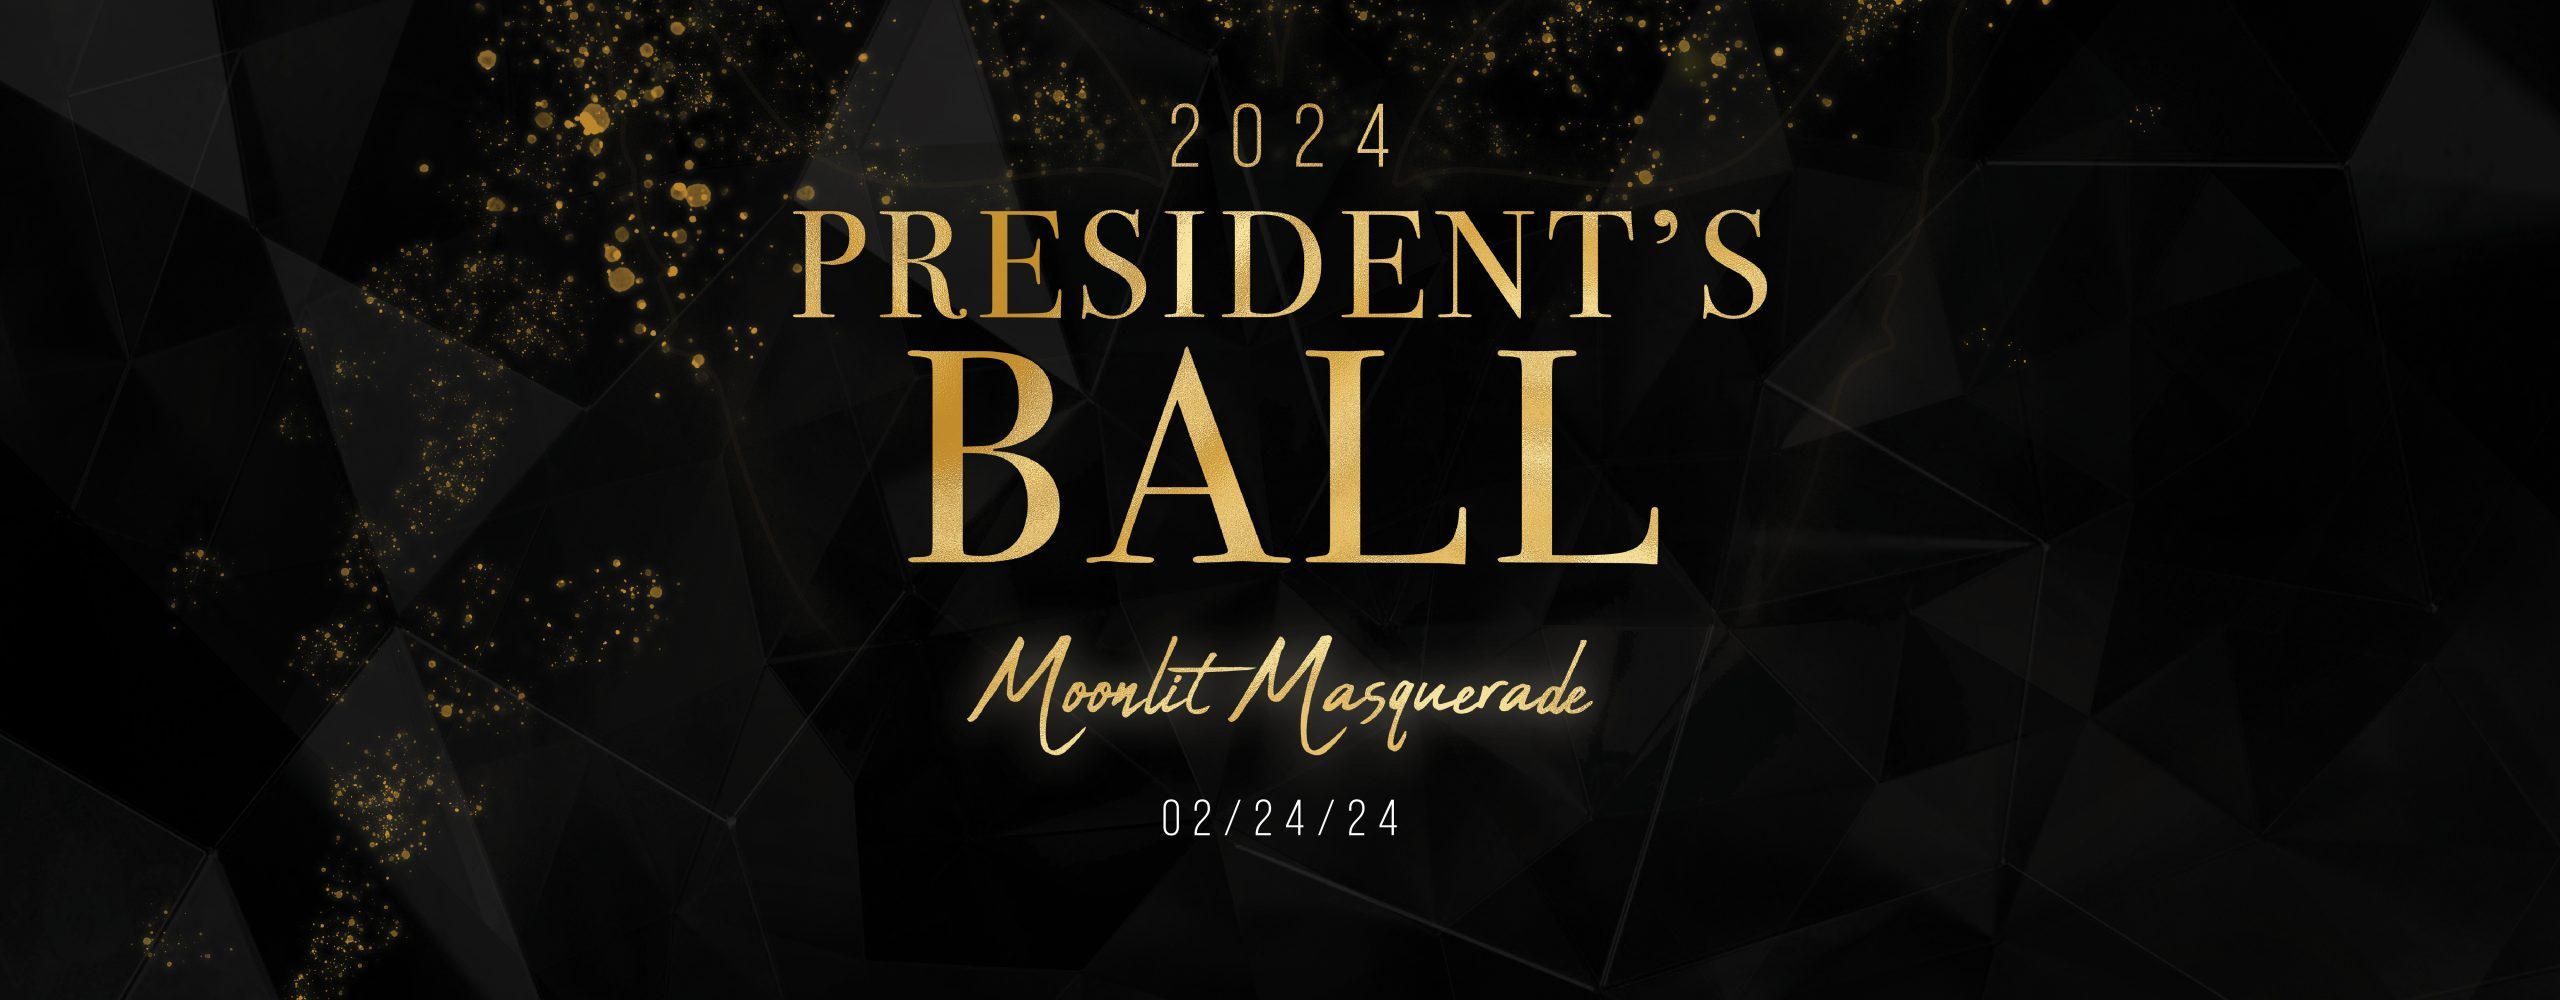 A black and gold graphic with the text, "2024 President's Ball: Moonlit Masquerade" with the date 02/24/2024.